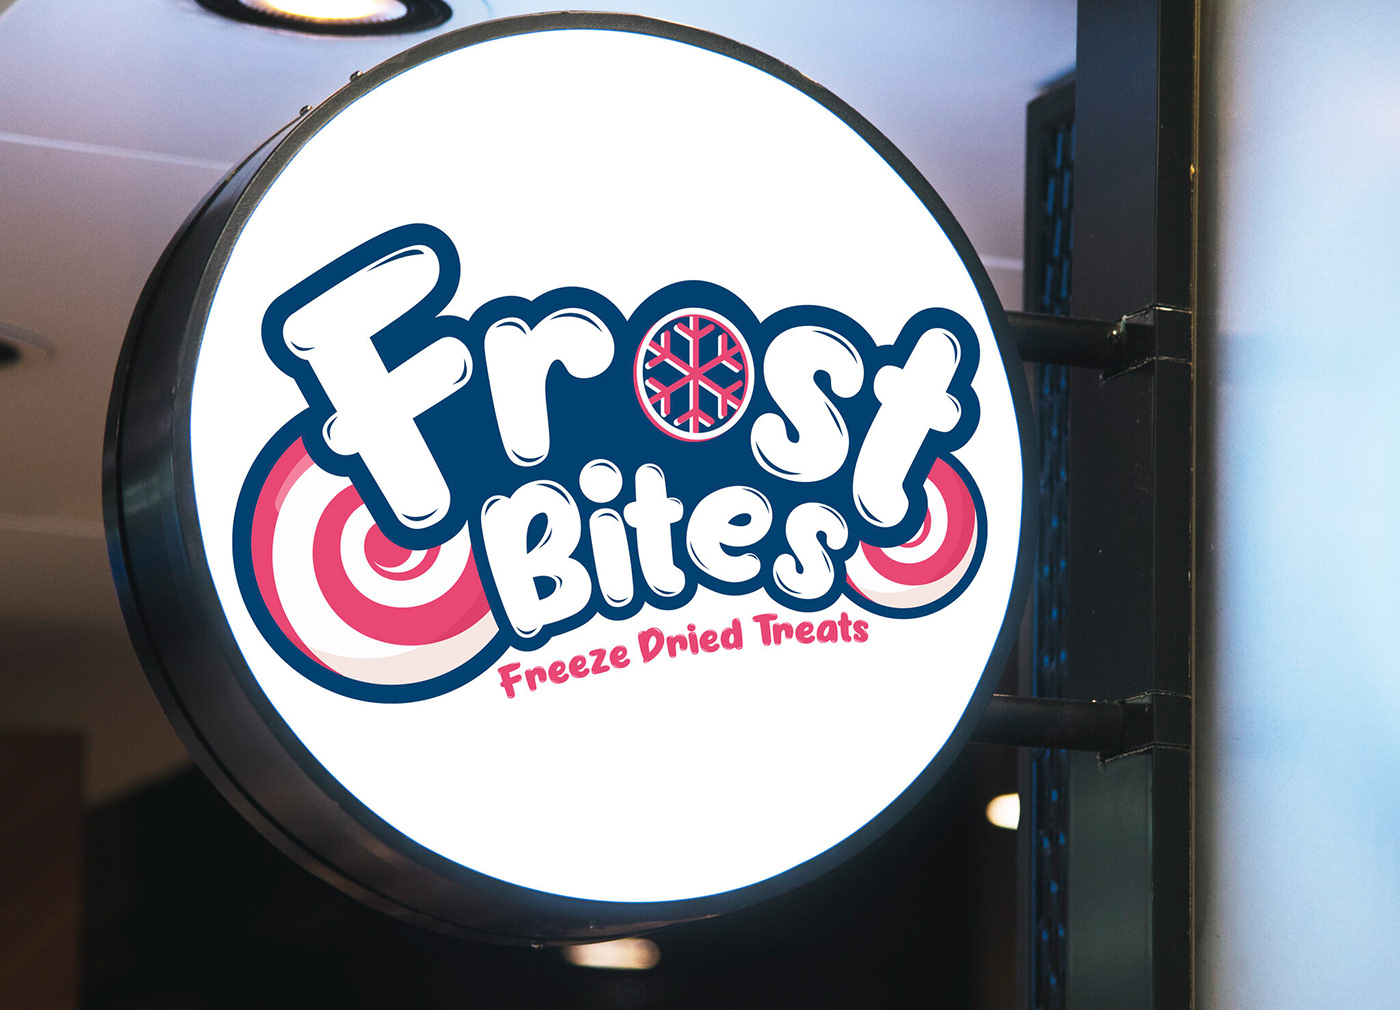 Signage Design for Frost bite Candy company.